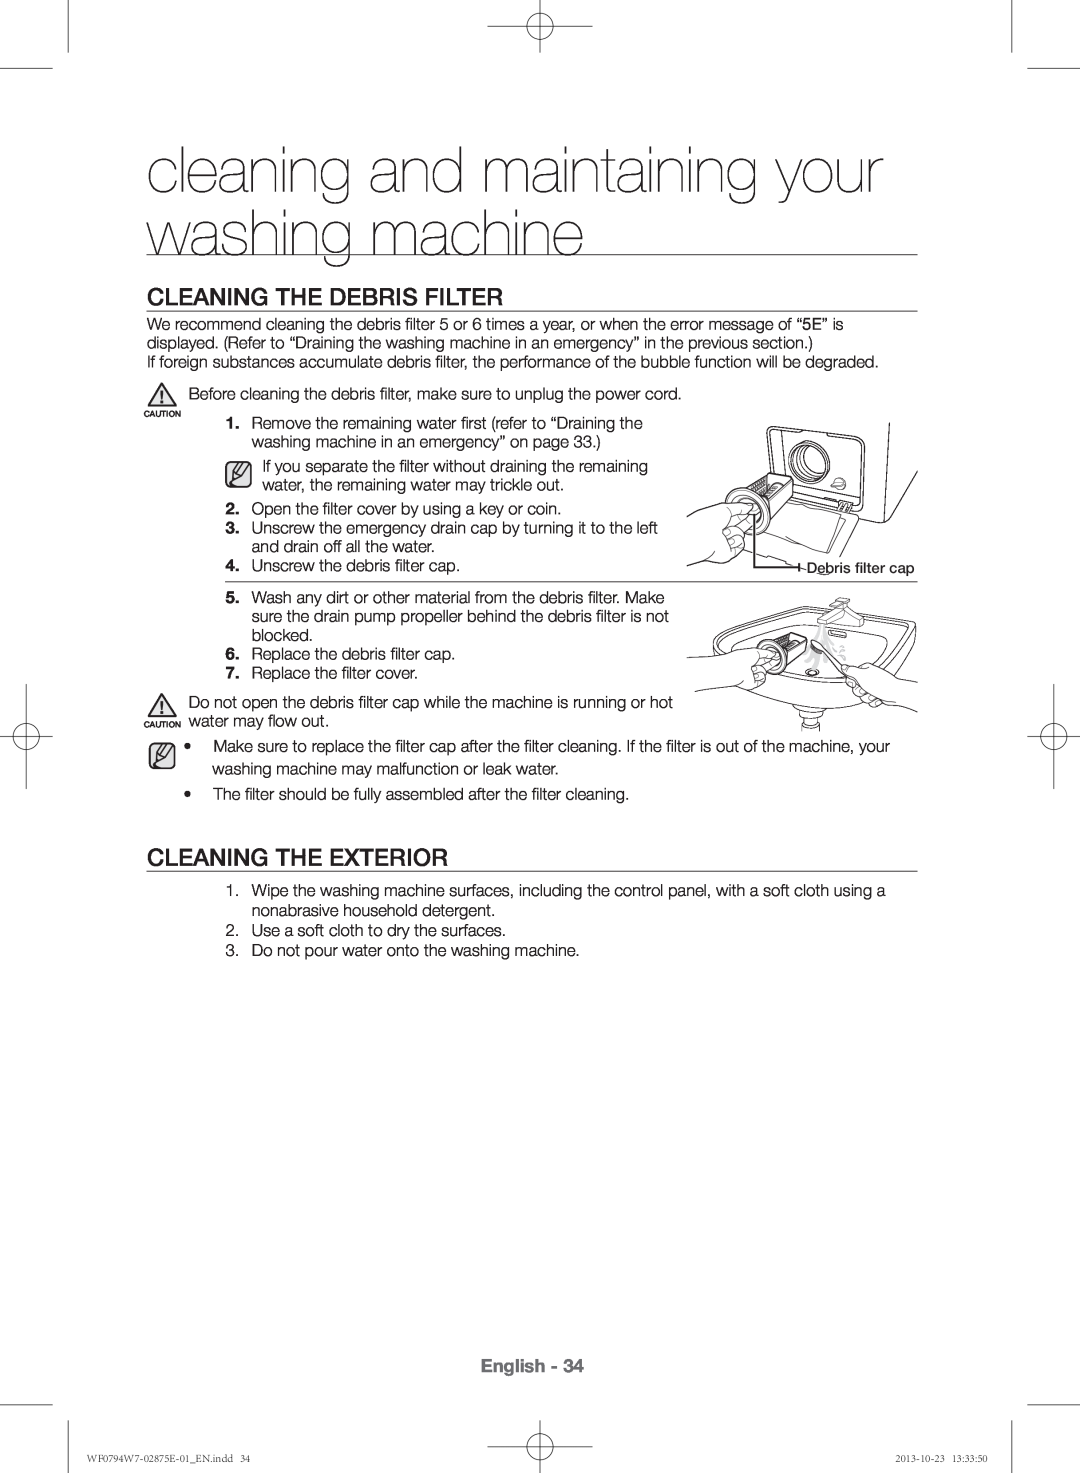 Samsung WF0794W7E9/XSV cleaning and maintaining your washing machine, Cleaning the debris filter, Cleaning the exterior 